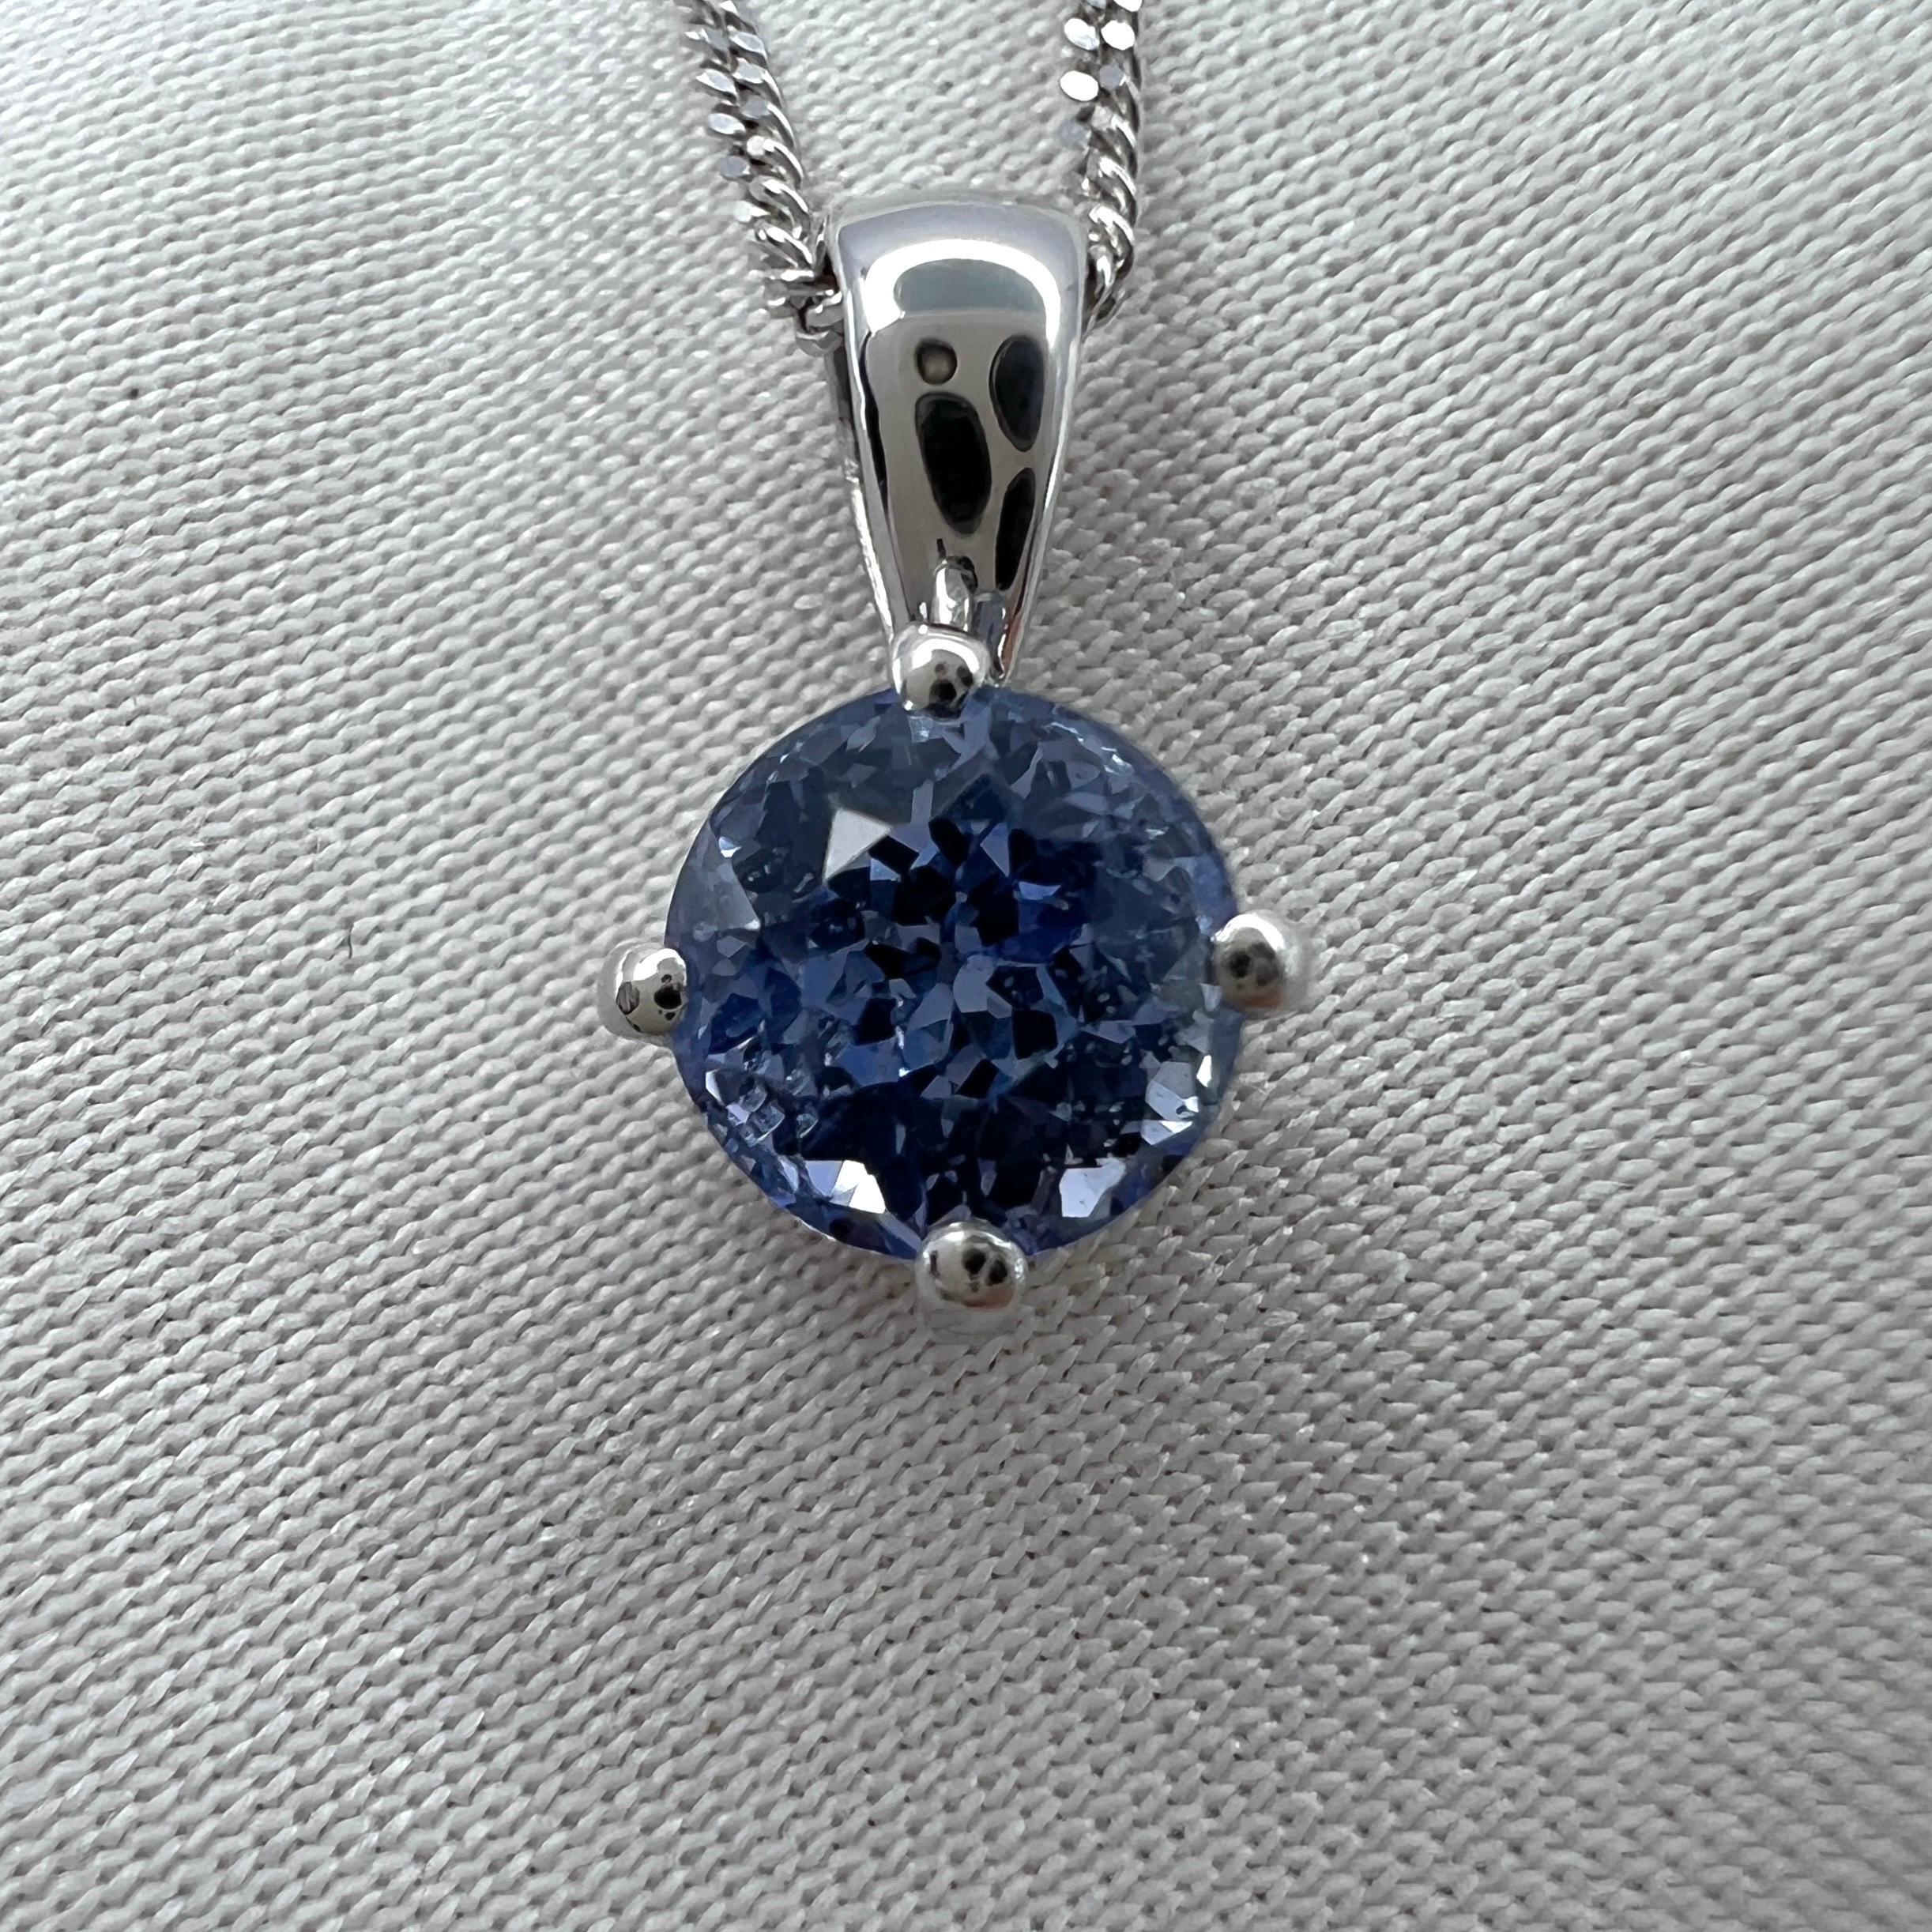 Vivid Blue Round Cut 950 Platinum Solitaire Pendant Necklace.

1.00 Carat spinel with a beautiful vivid blue colour and an excellent round cut. Also has very good clarity, a clean stone with only some small natural inclusions visible when looking